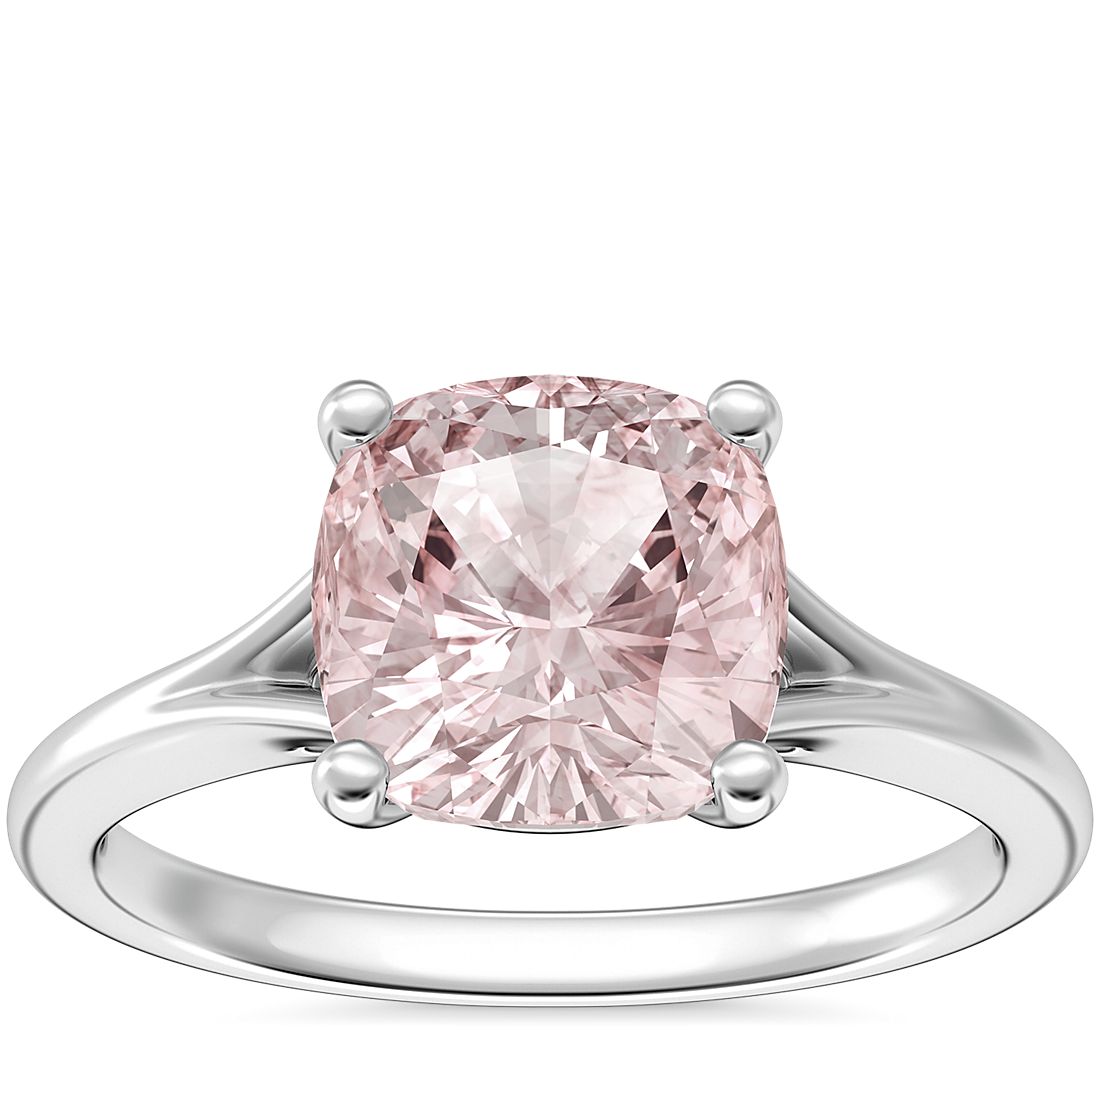 Petite Split Shank Solitaire Engagement Ring with Cushion Morganite in Platinum (8mm)